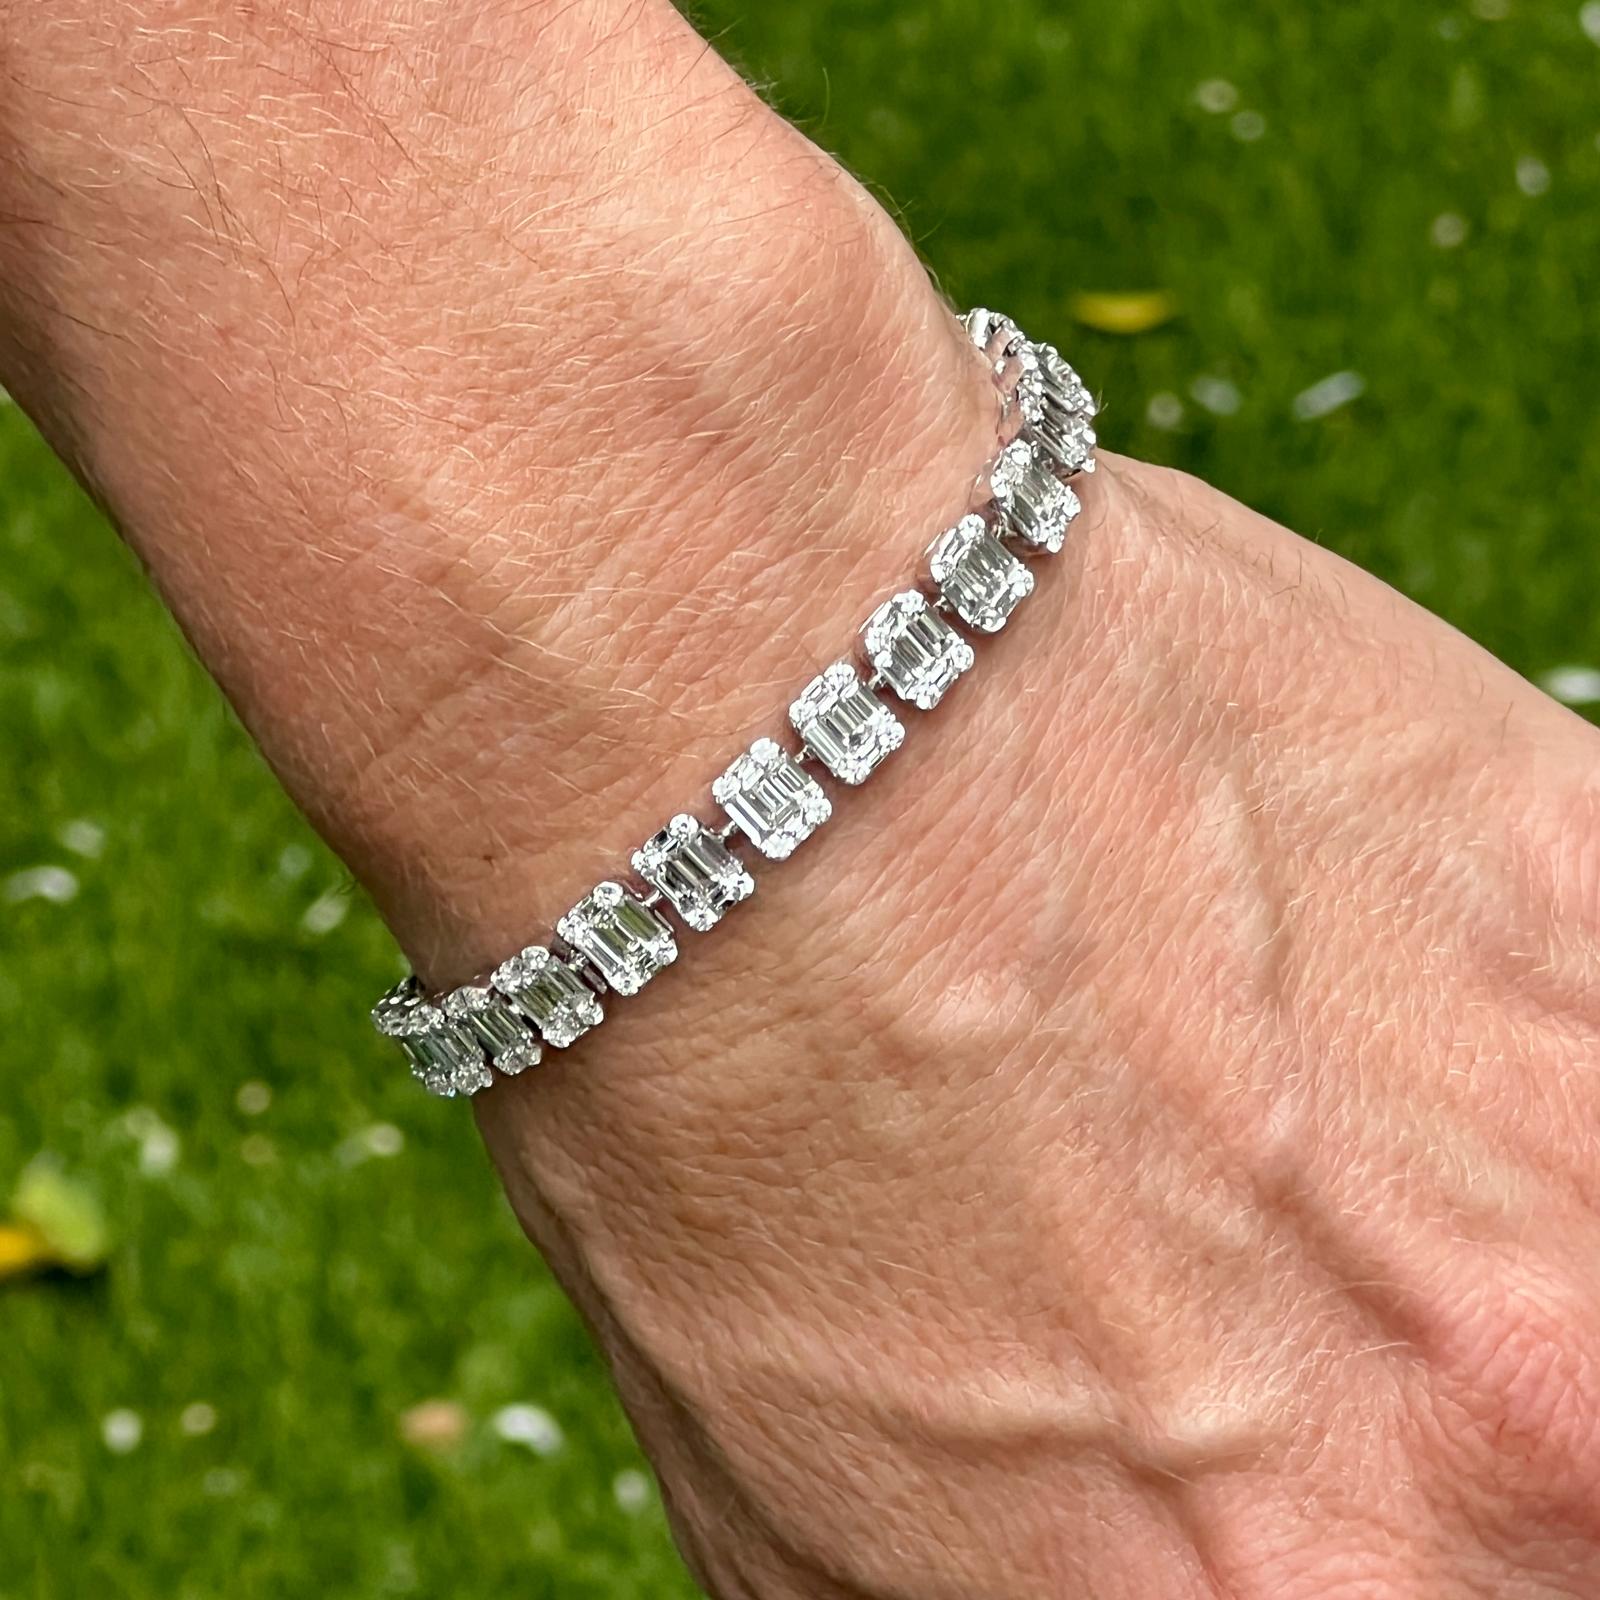 Stunning diamond rectangular link modern bracelet handcrafted in Italy and fashioned in 18 karat white gold. The bracelet features 27 diamond links consisting of round brilliant and baguette cut diamonds weighing approximately 9.83 carat total